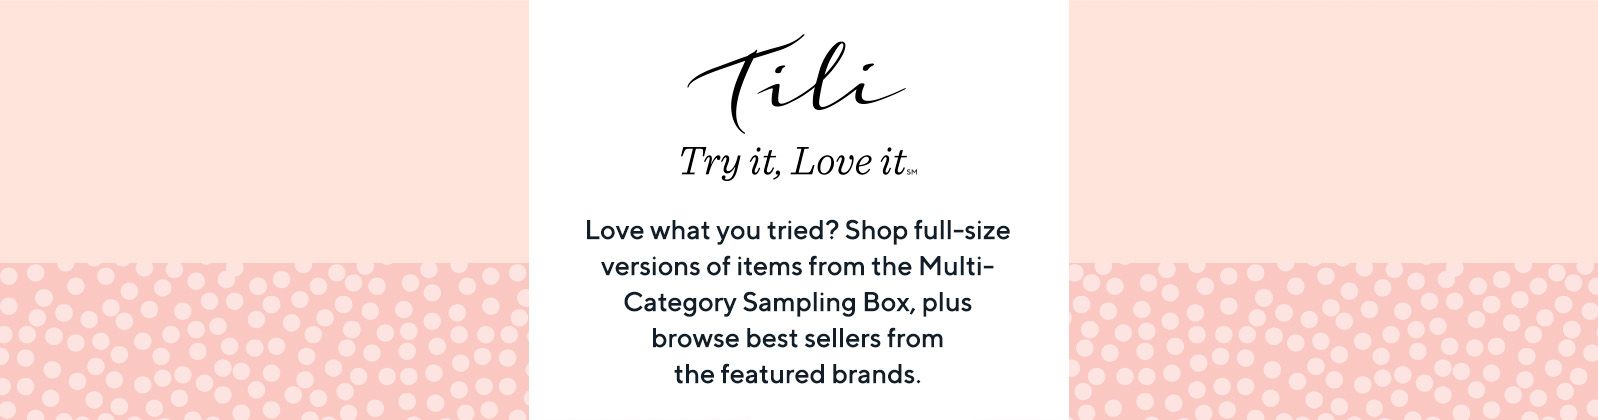 TILI Try it, Love it® Love what you tried? Shop full-size versions of items from the Multi-Category Sampling Box, plus browse best sellers from the featured brands.